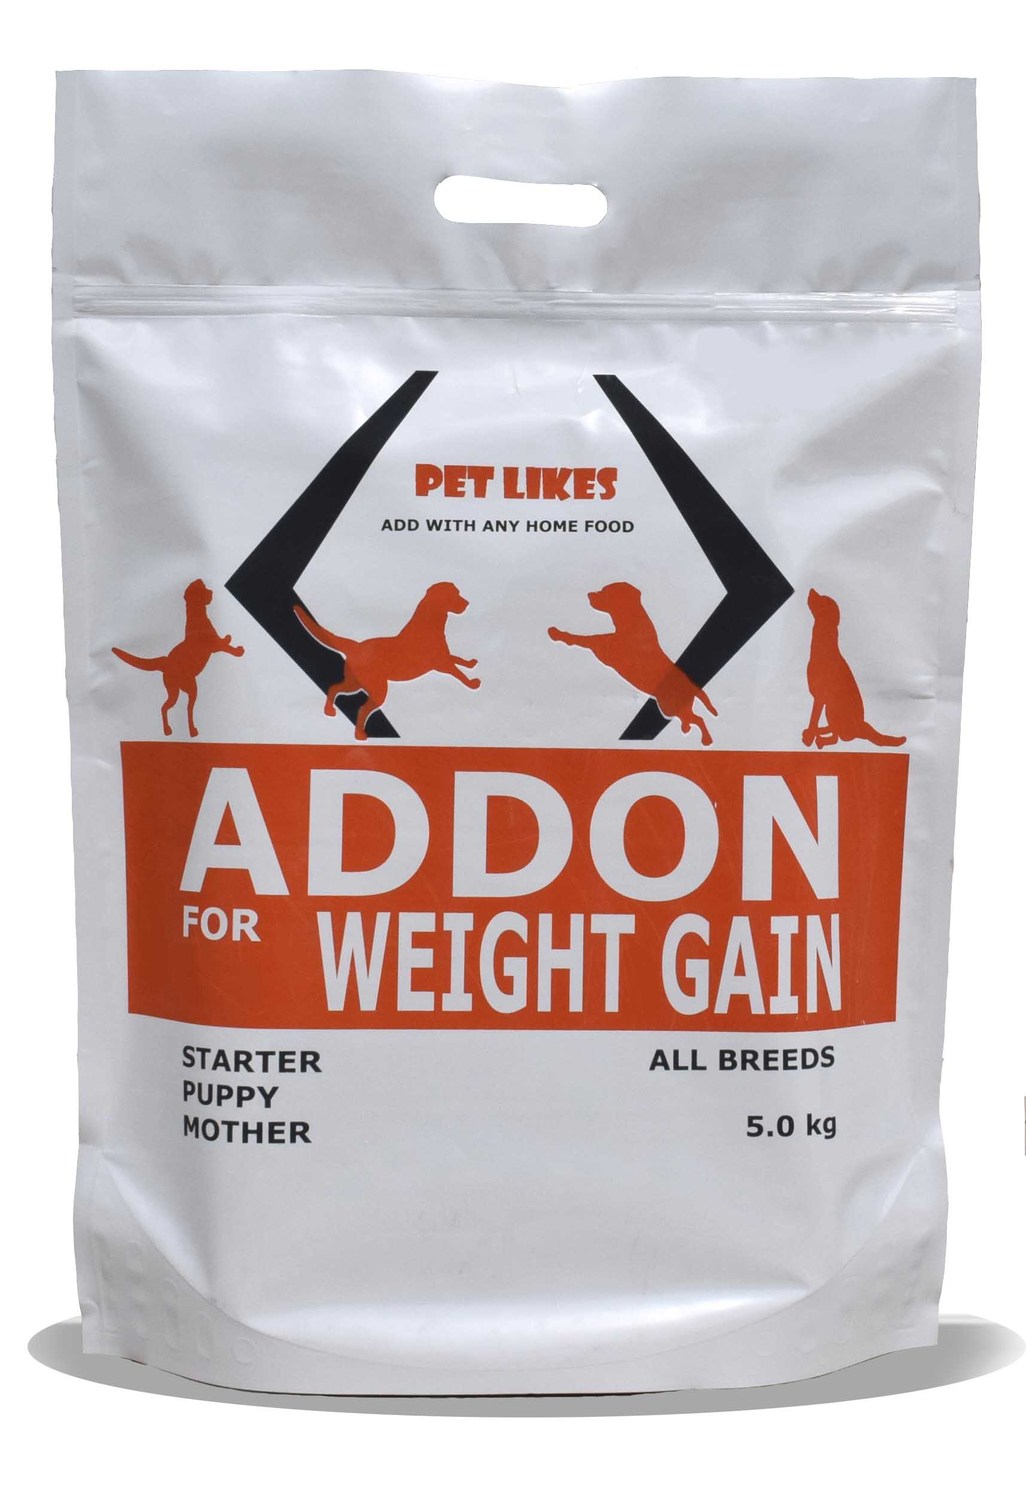 Pet Likes ADD ON Weight Gain – 5 Kg. The 3-Week Weight Gain Dog Food